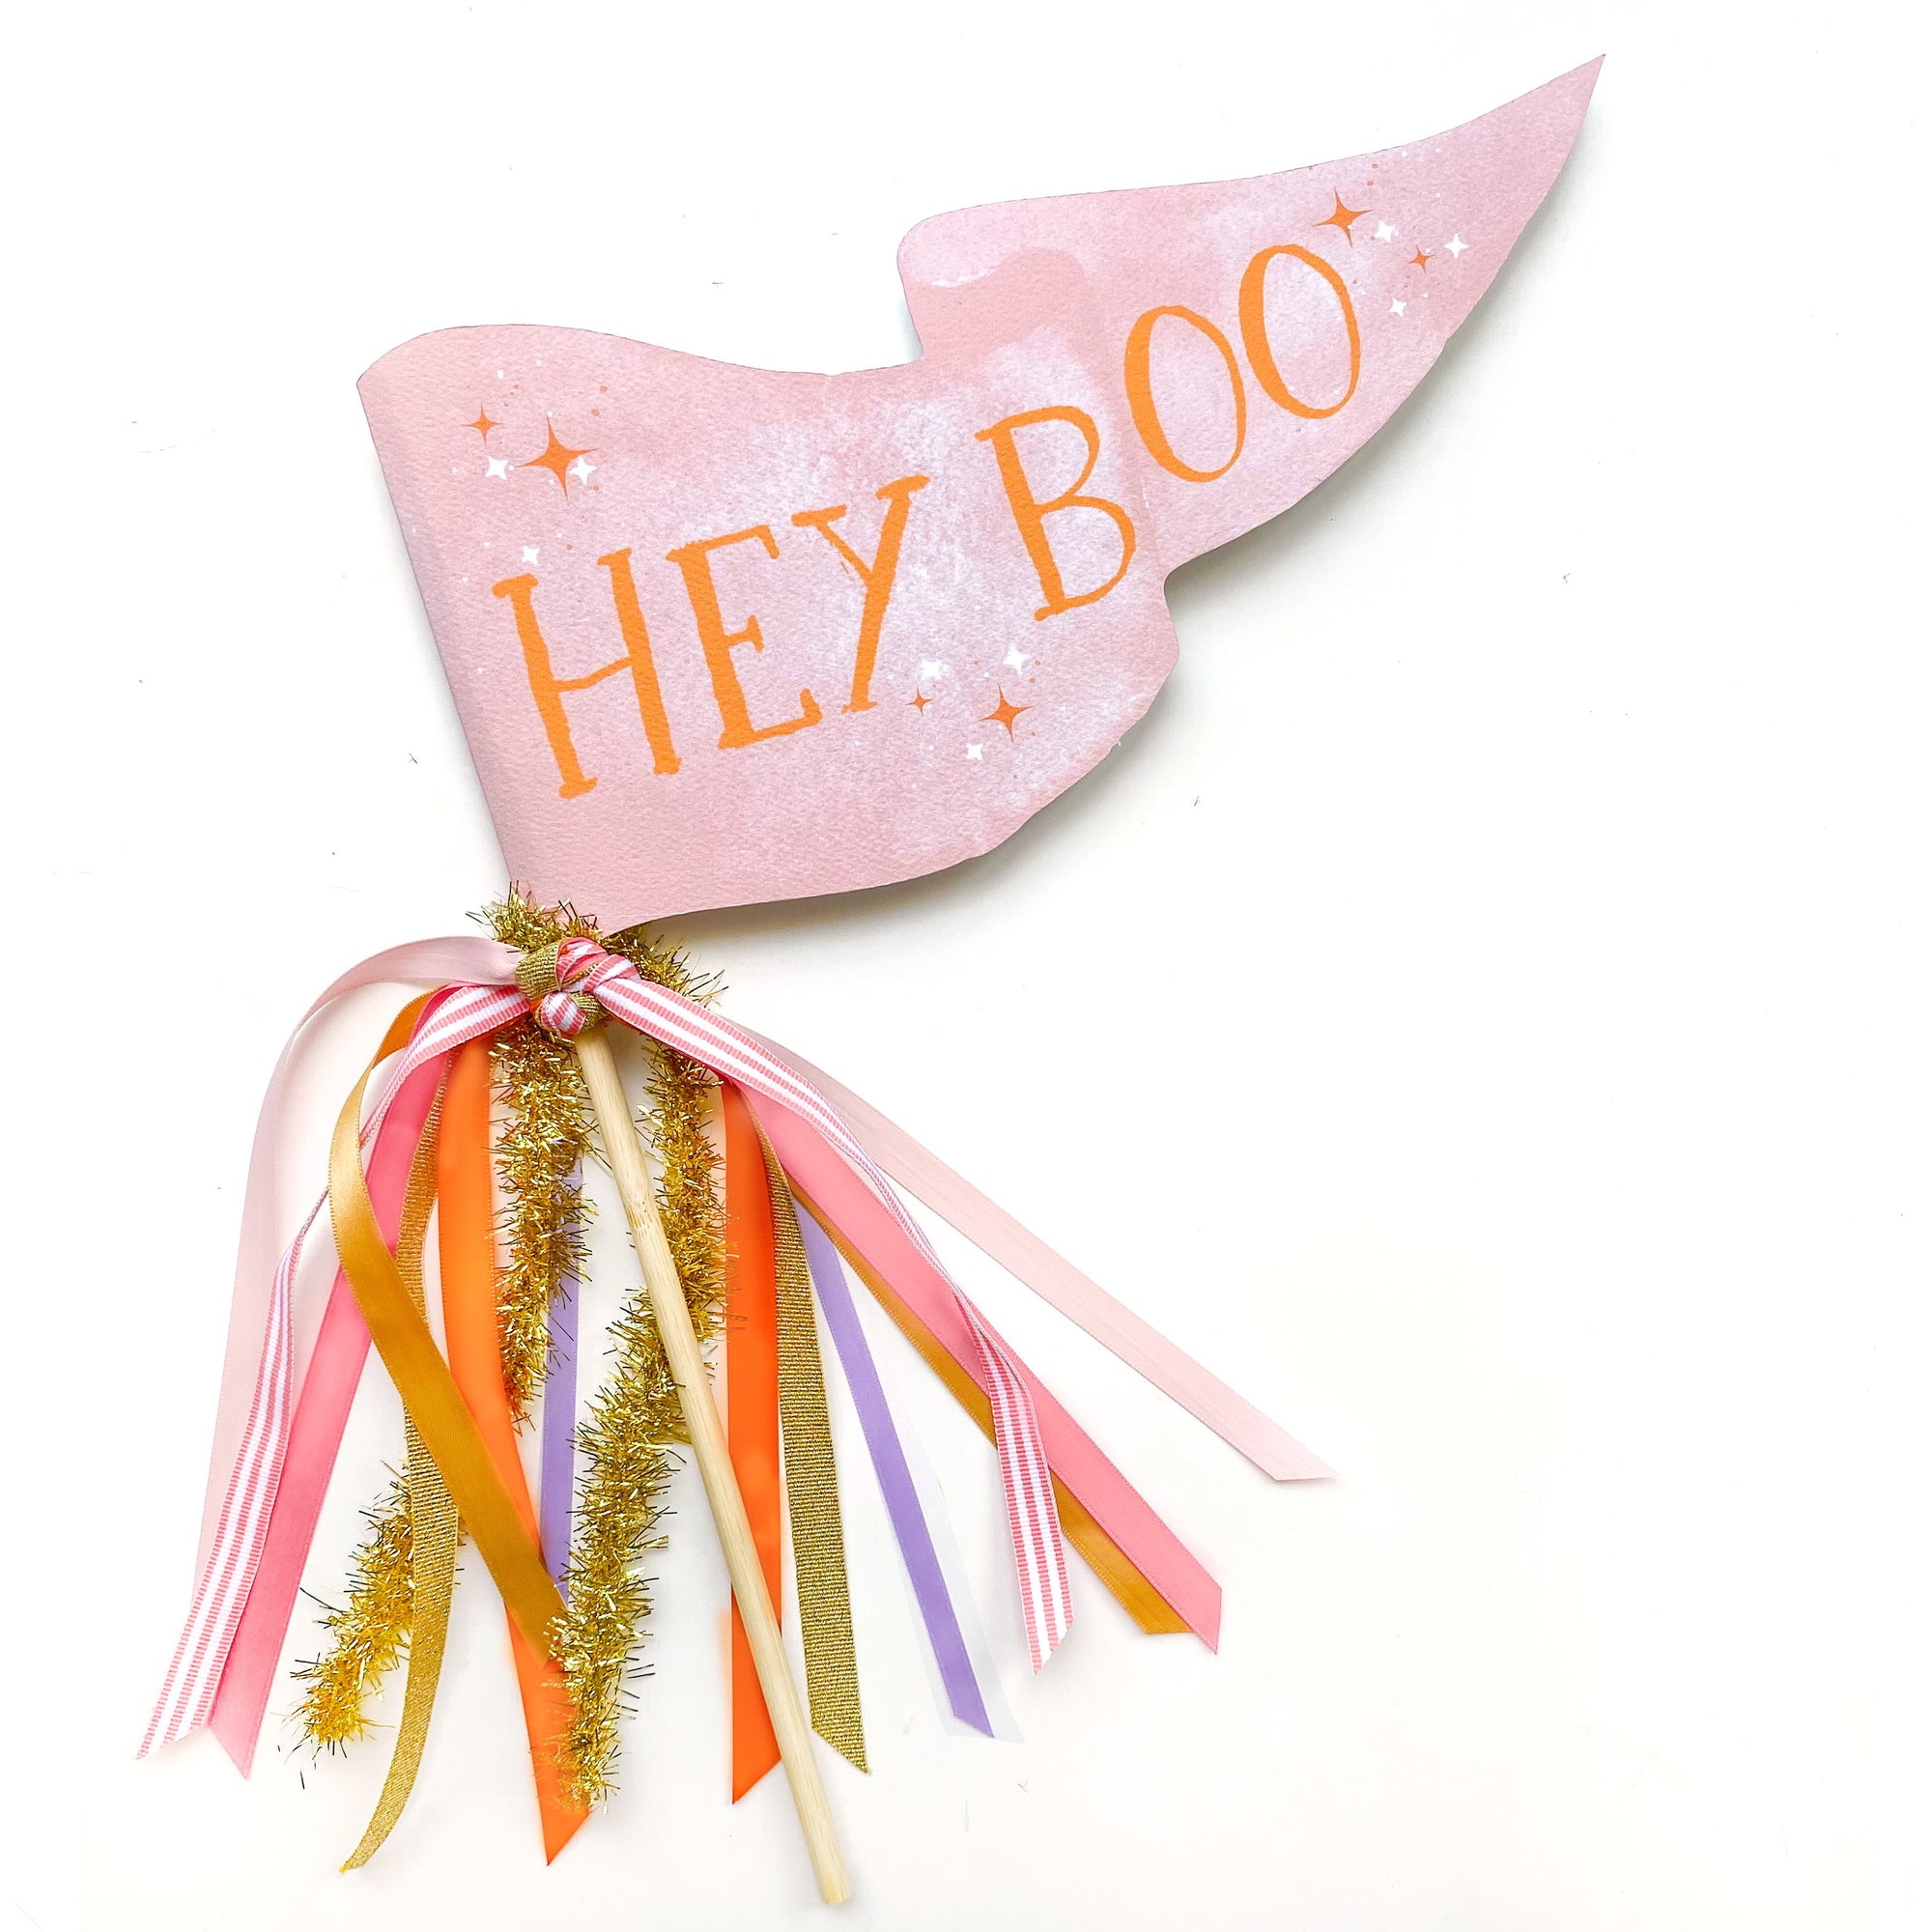 Hey Boo Party Pennant